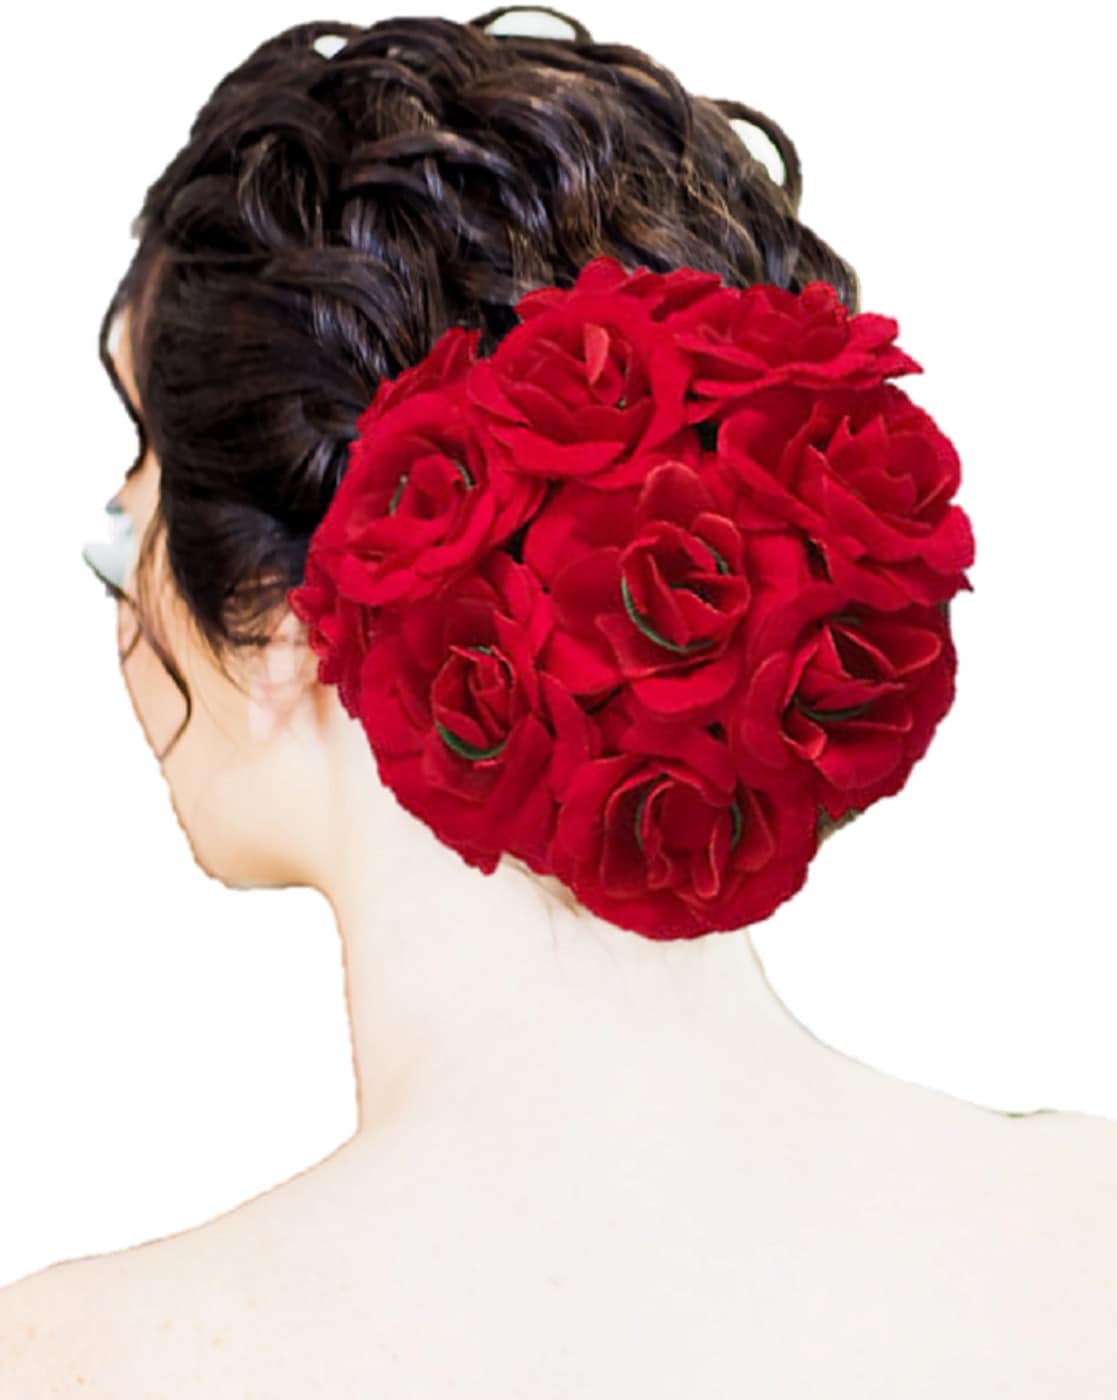 Hairstyle Ideas For The Brides Who Love Wearing Roses | Threads - WeRIndia